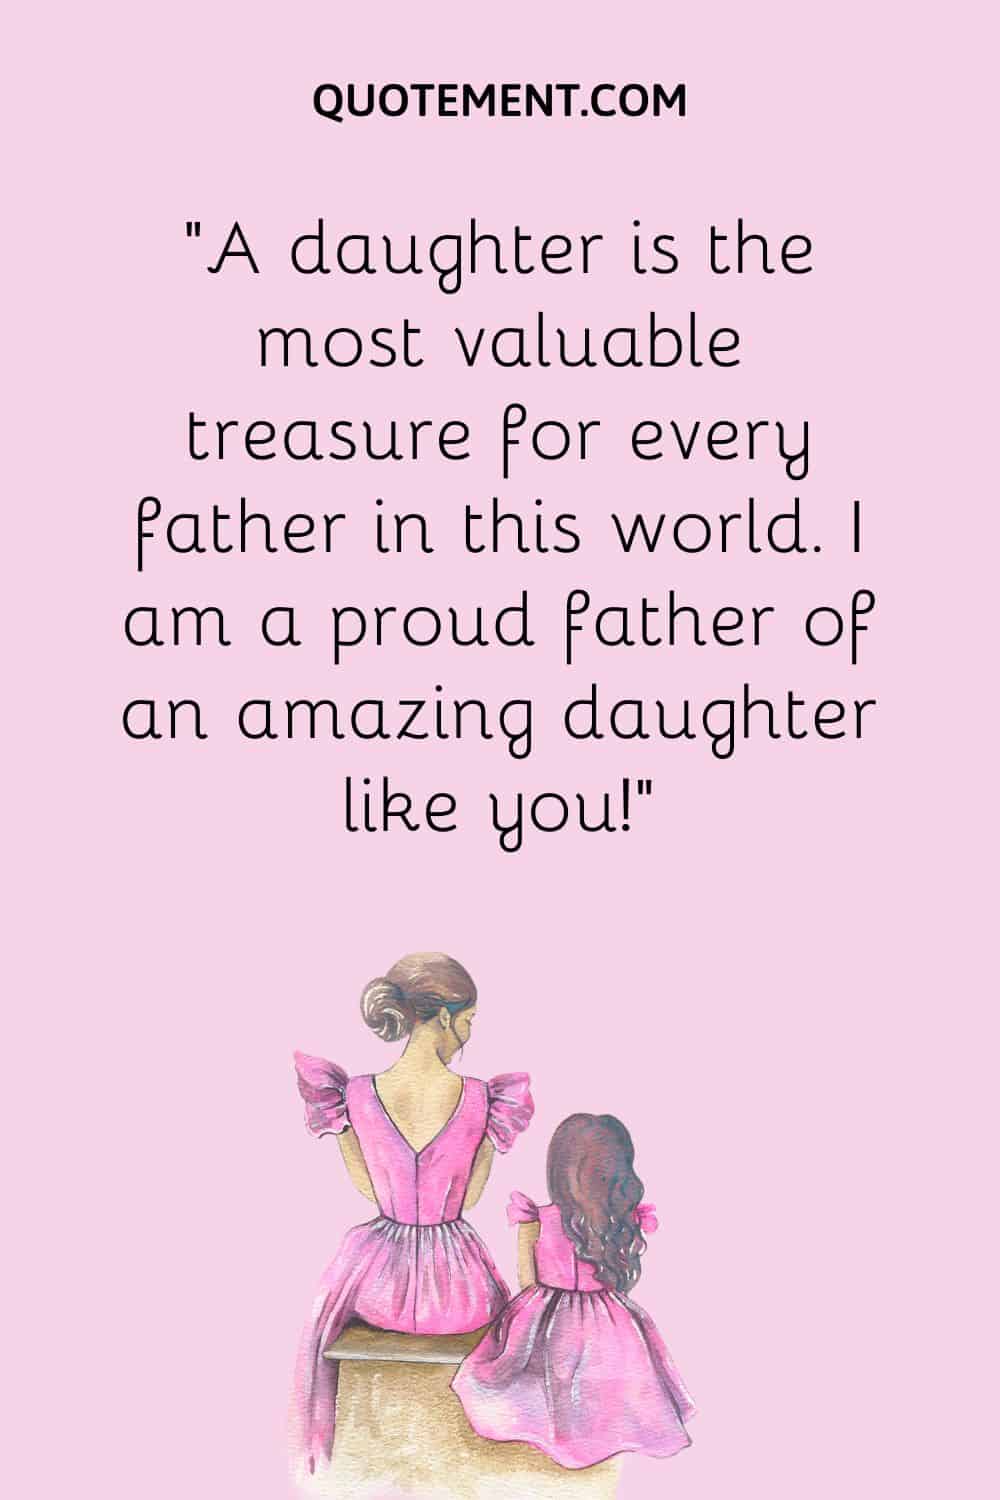 “A daughter is the most valuable treasure for every father in this world. I am a proud father of an amazing daughter like you!”